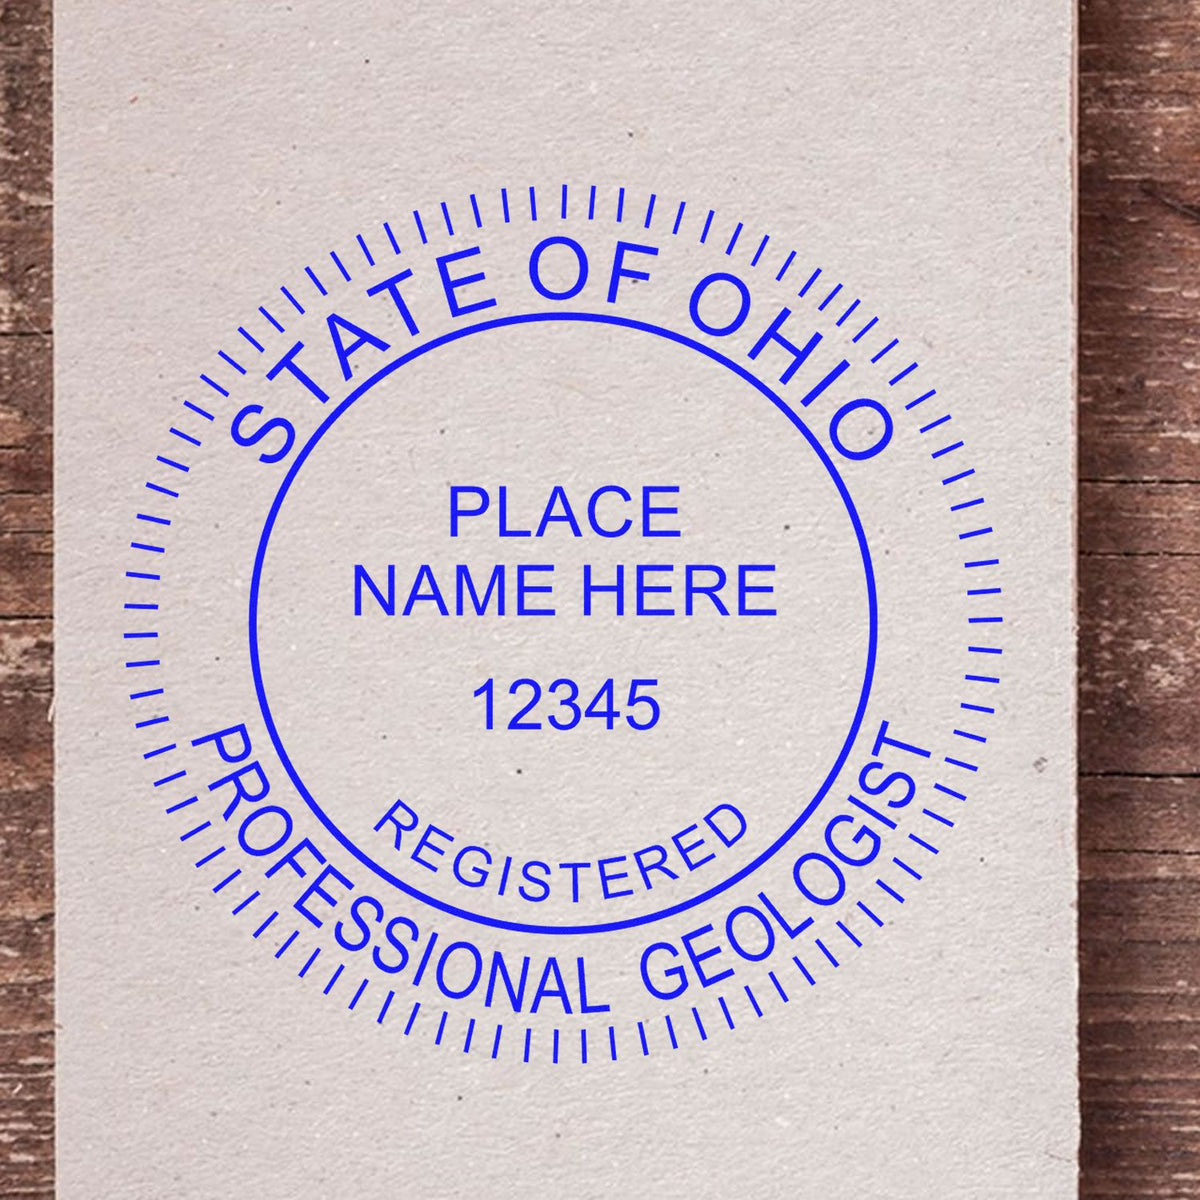 An alternative view of the Digital Ohio Geologist Stamp, Electronic Seal for Ohio Geologist stamped on a sheet of paper showing the image in use